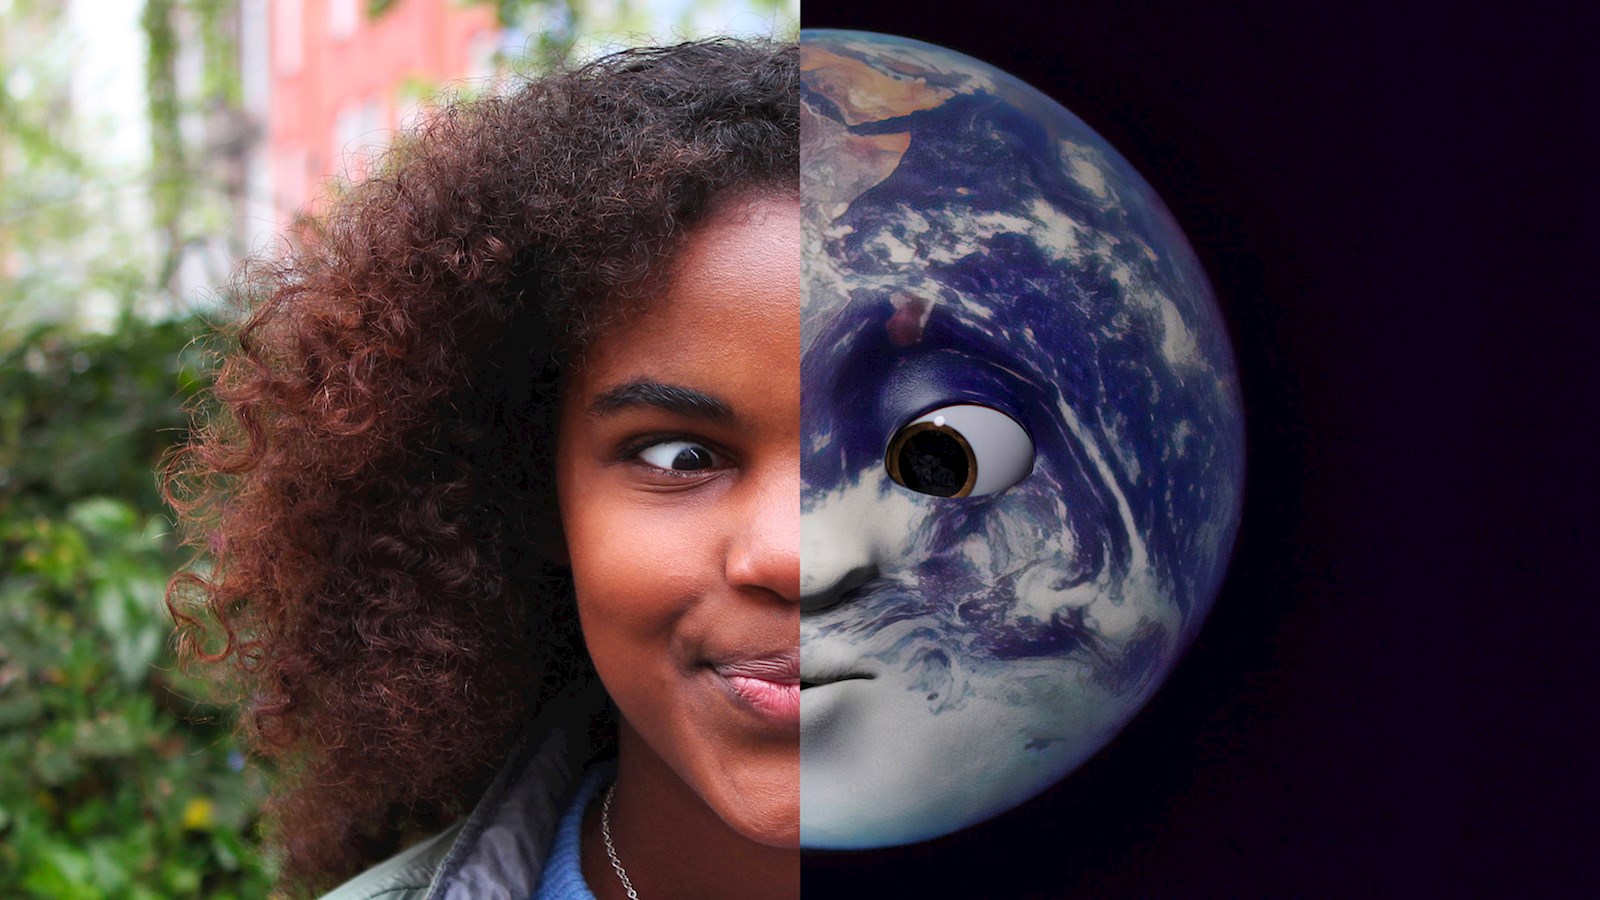 Half of the image is of a girls face and the other half is of the world with a face